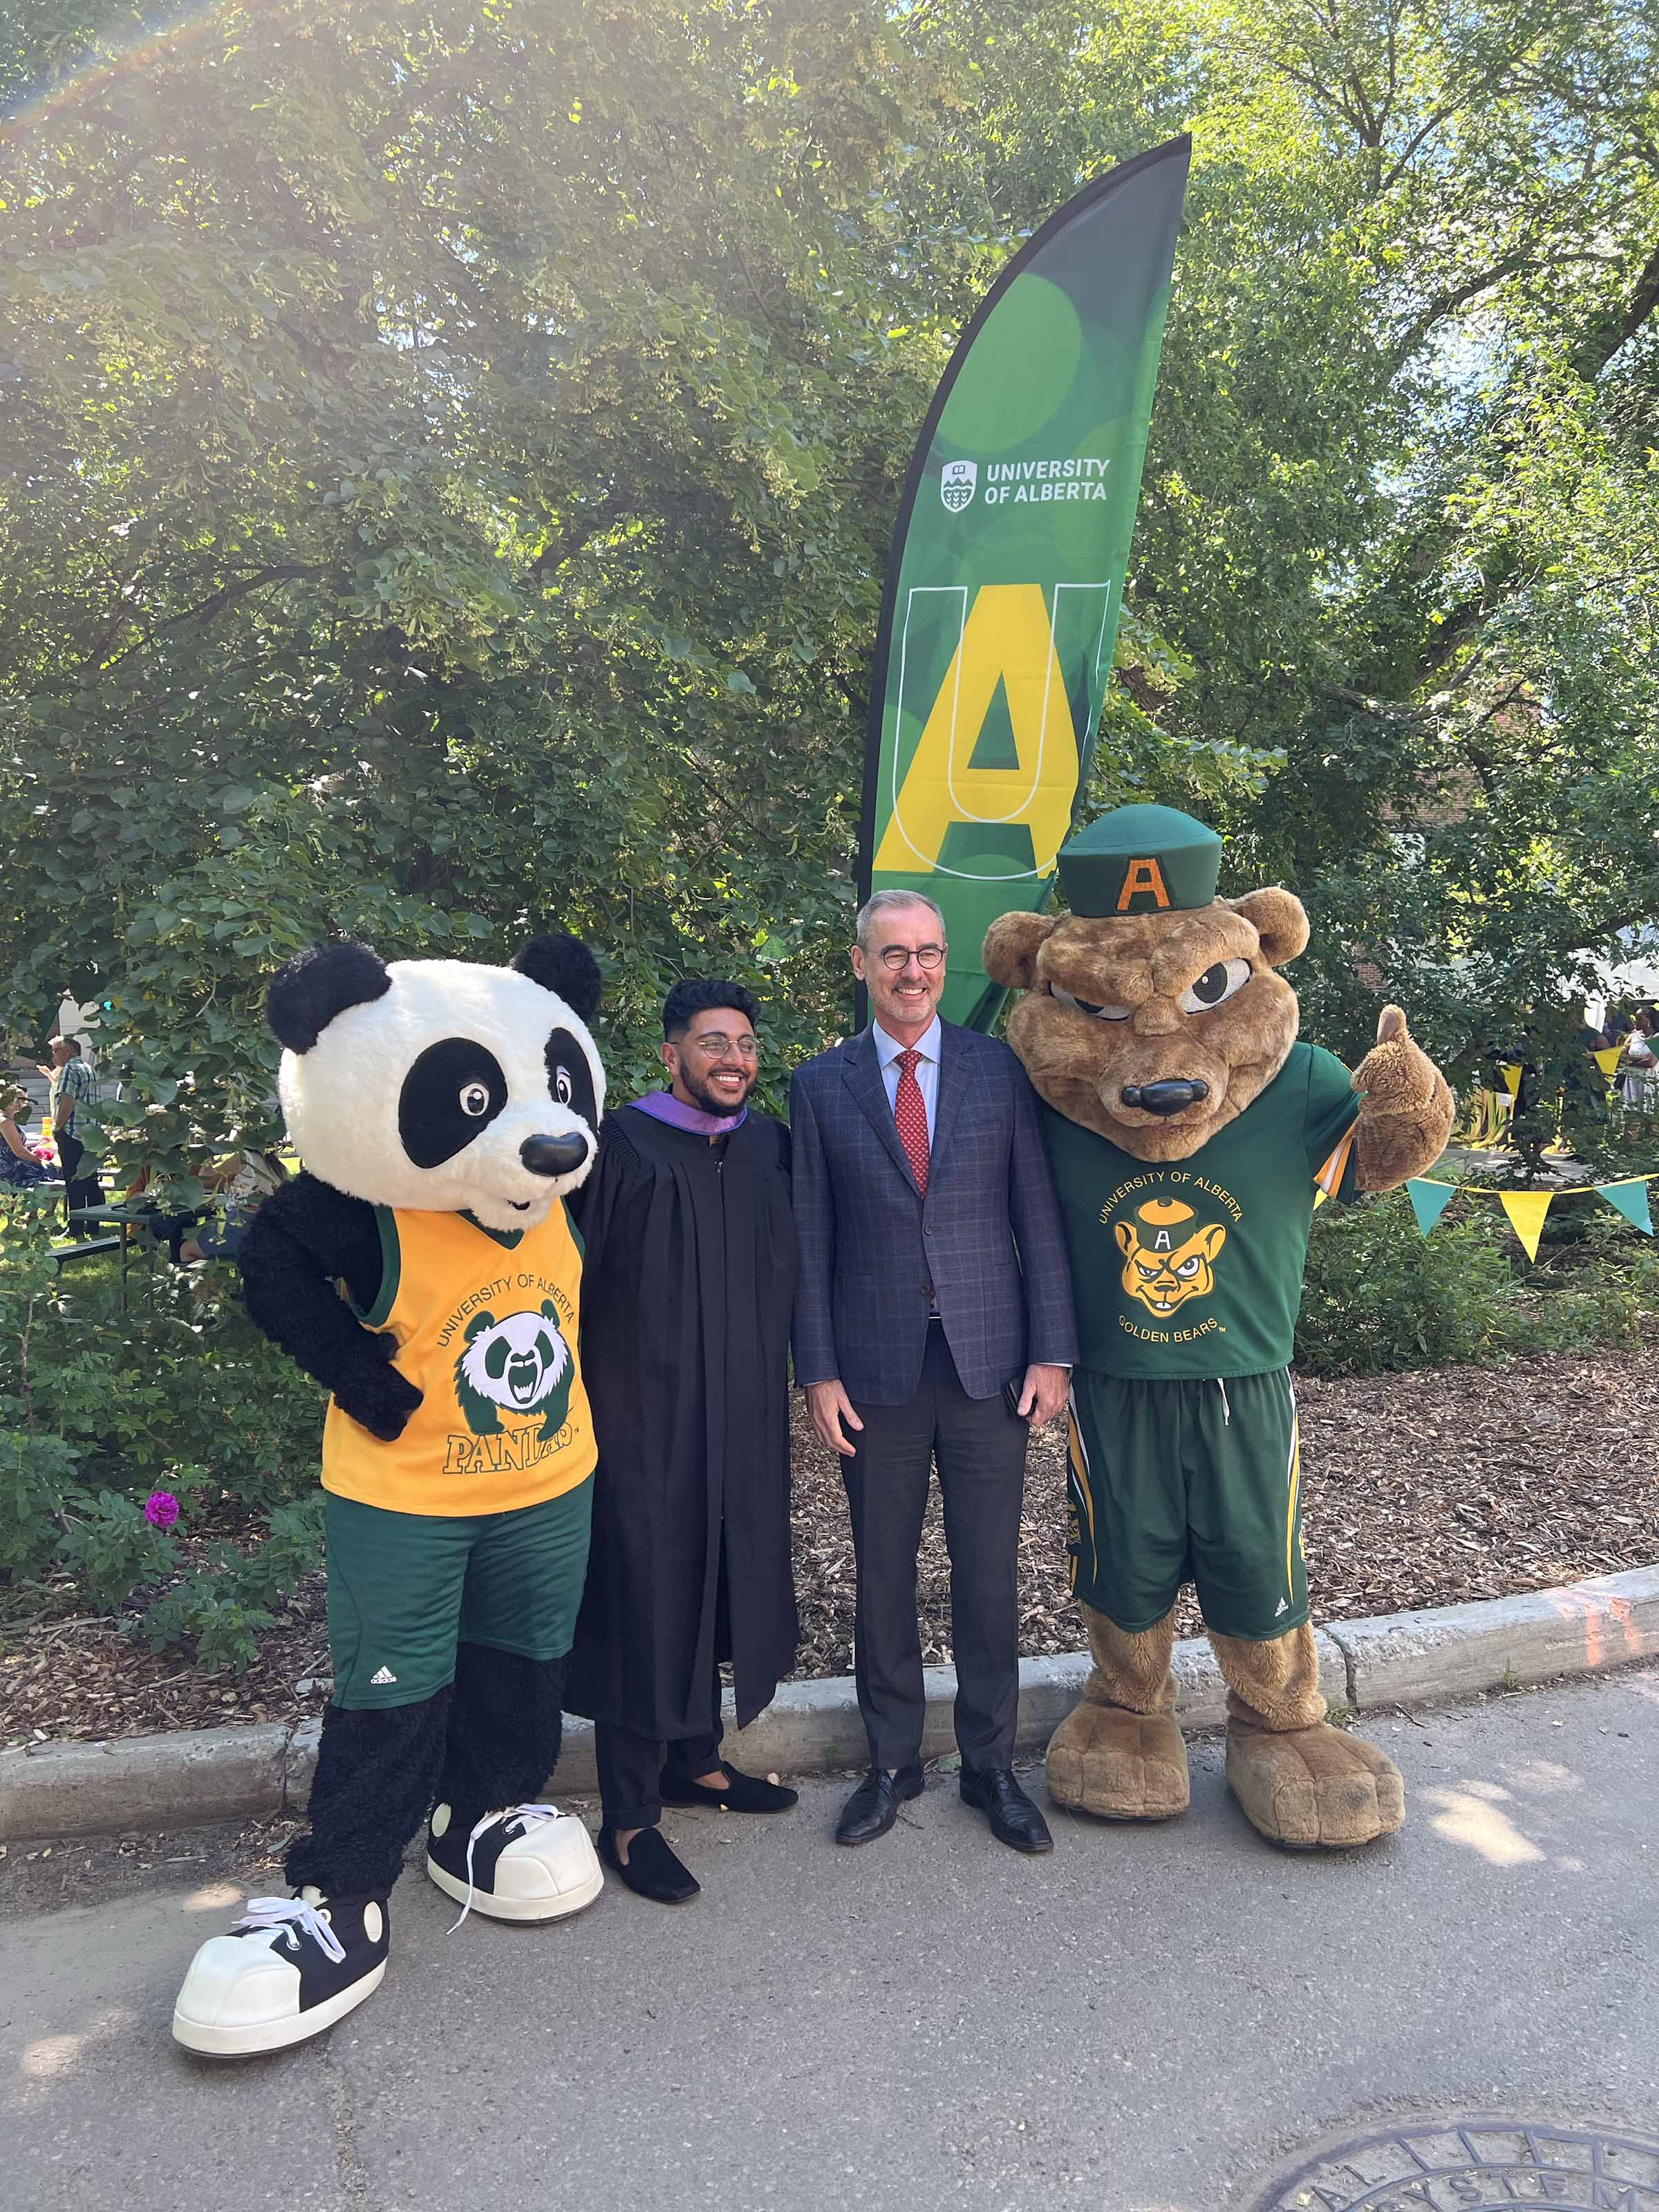 A grad poses with President Flanagan, Patches and Guba.